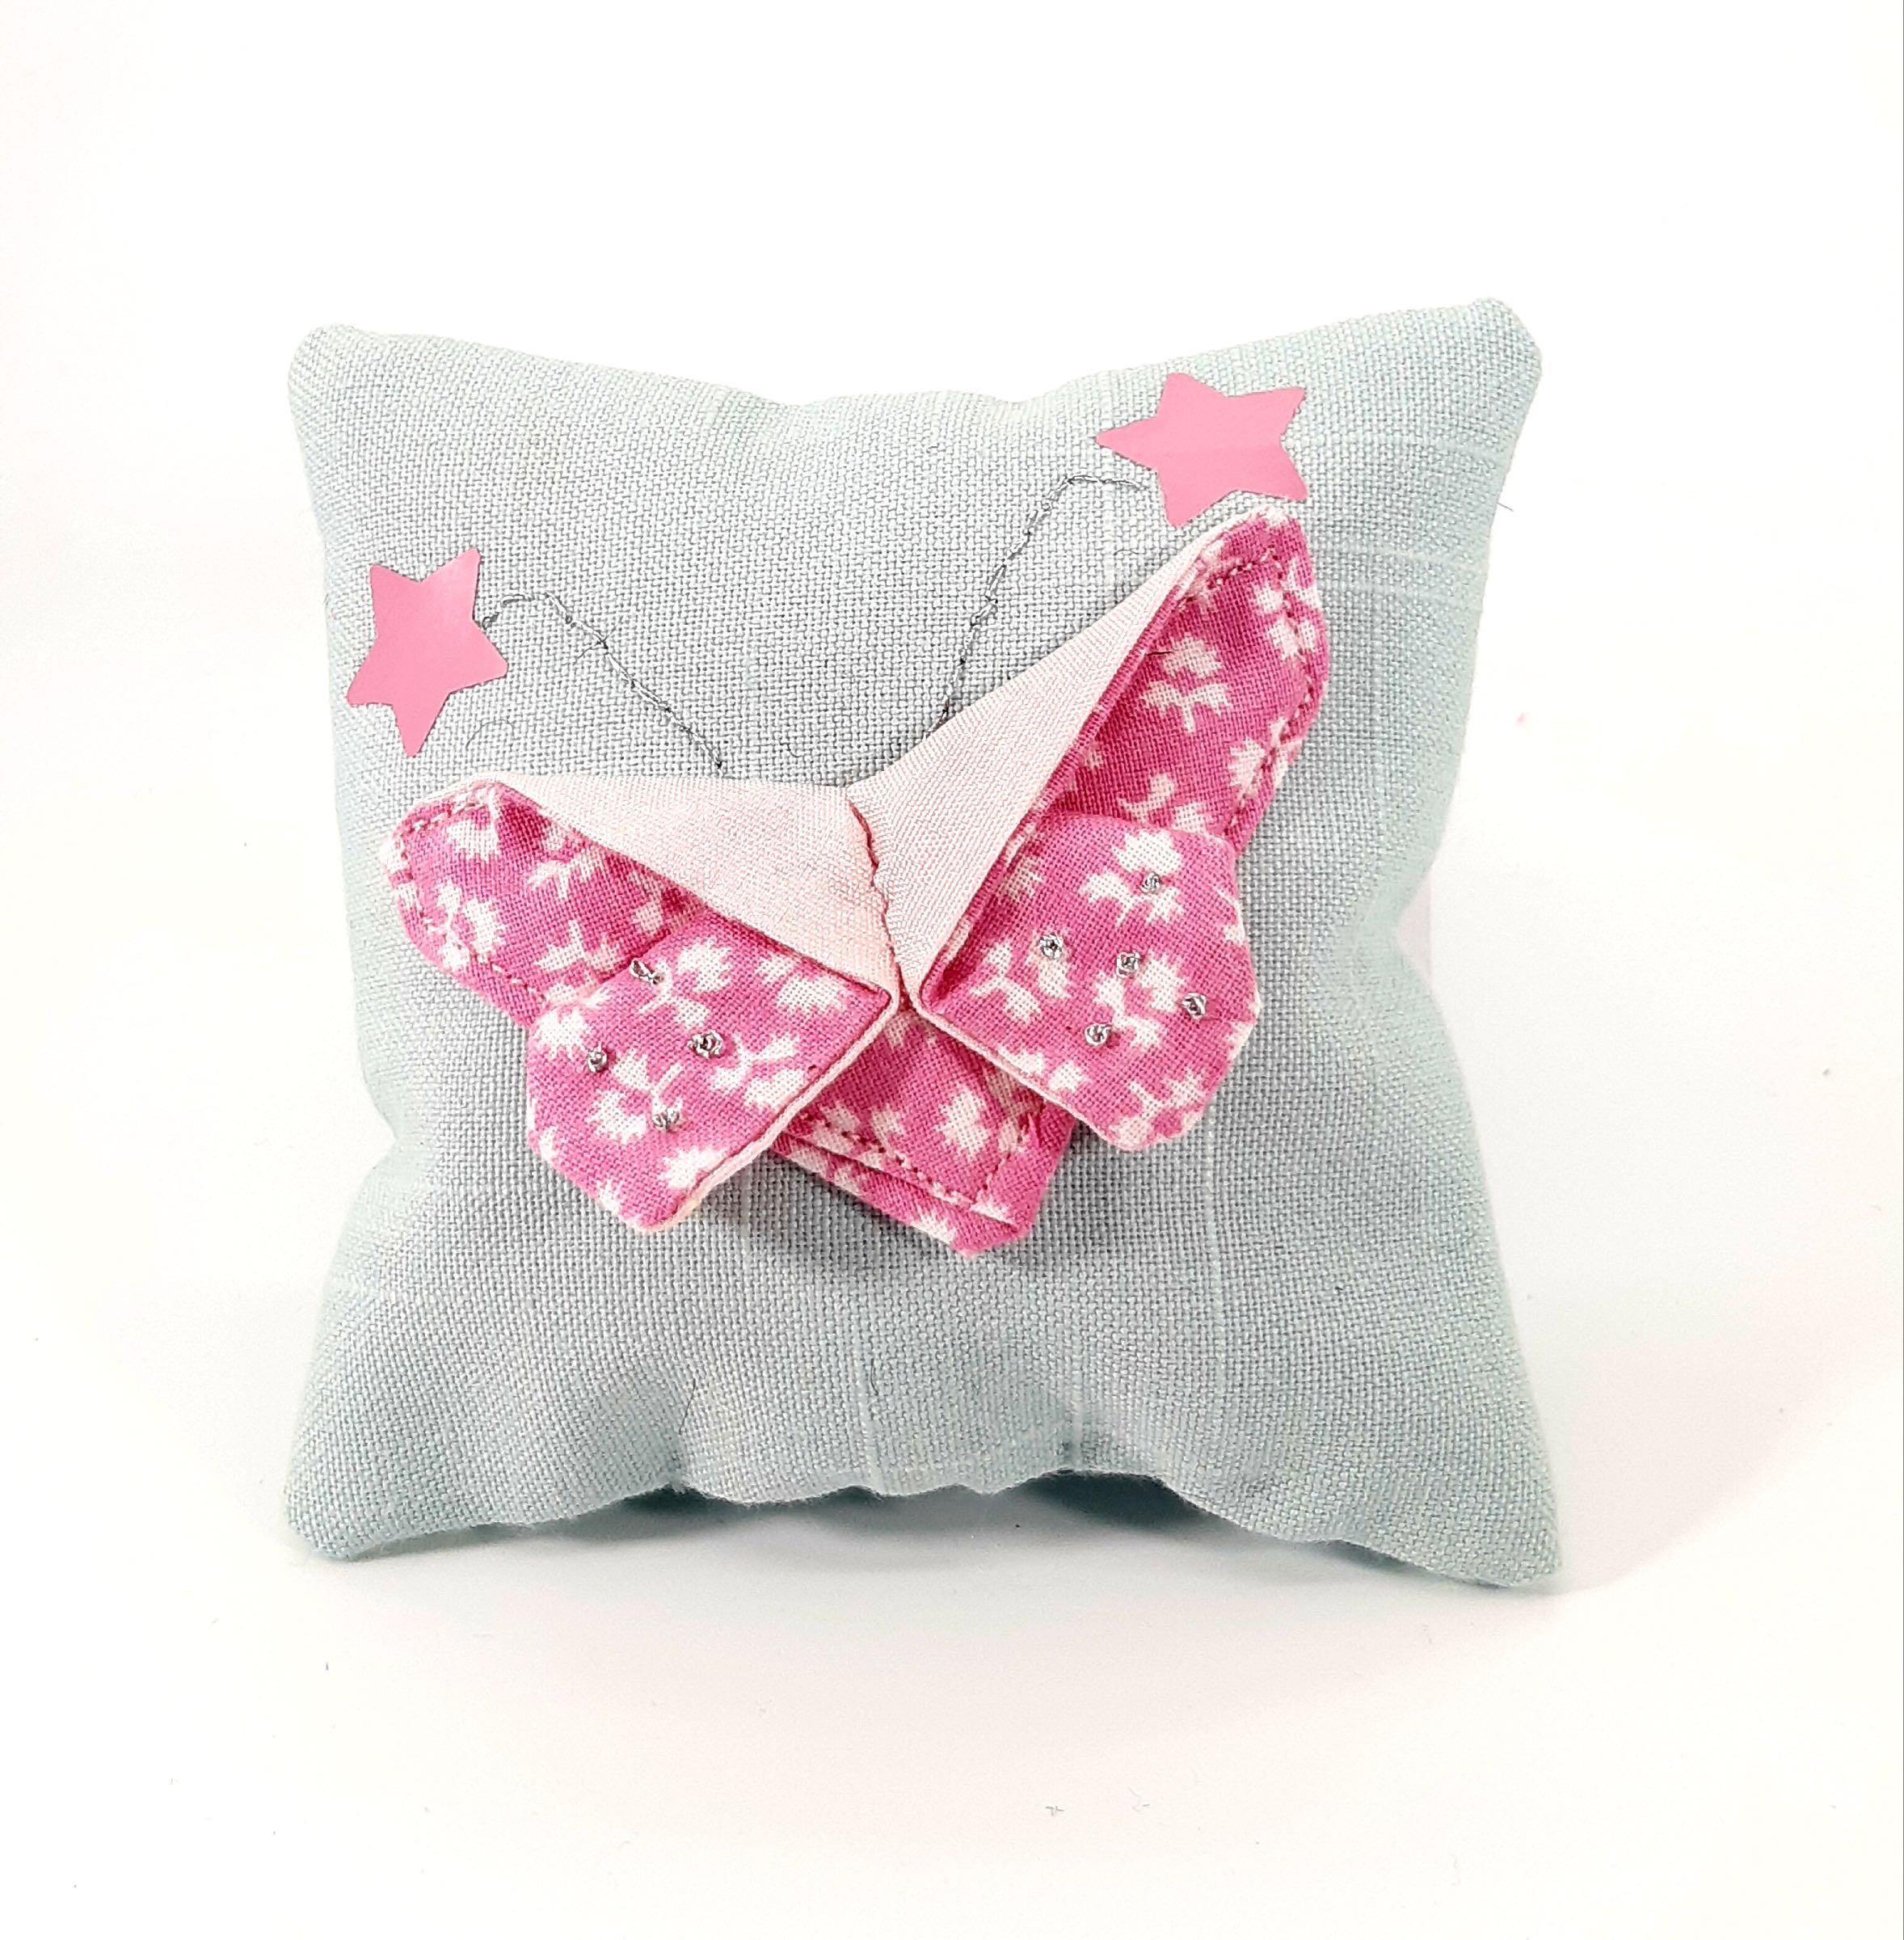 Origami Tooth Pillow